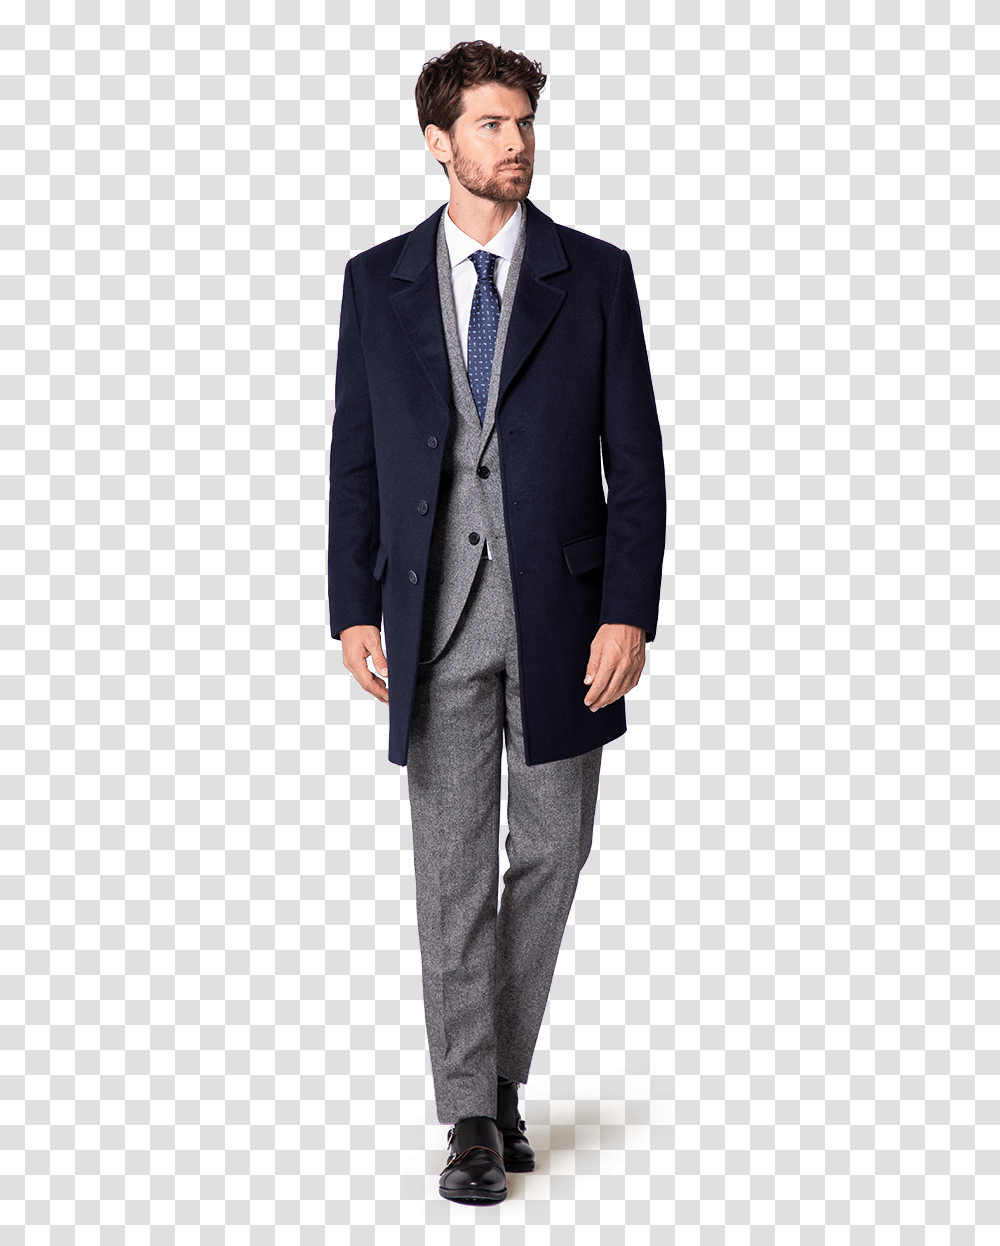 Mens Overcoat With Suit, Apparel, Tie, Accessories Transparent Png